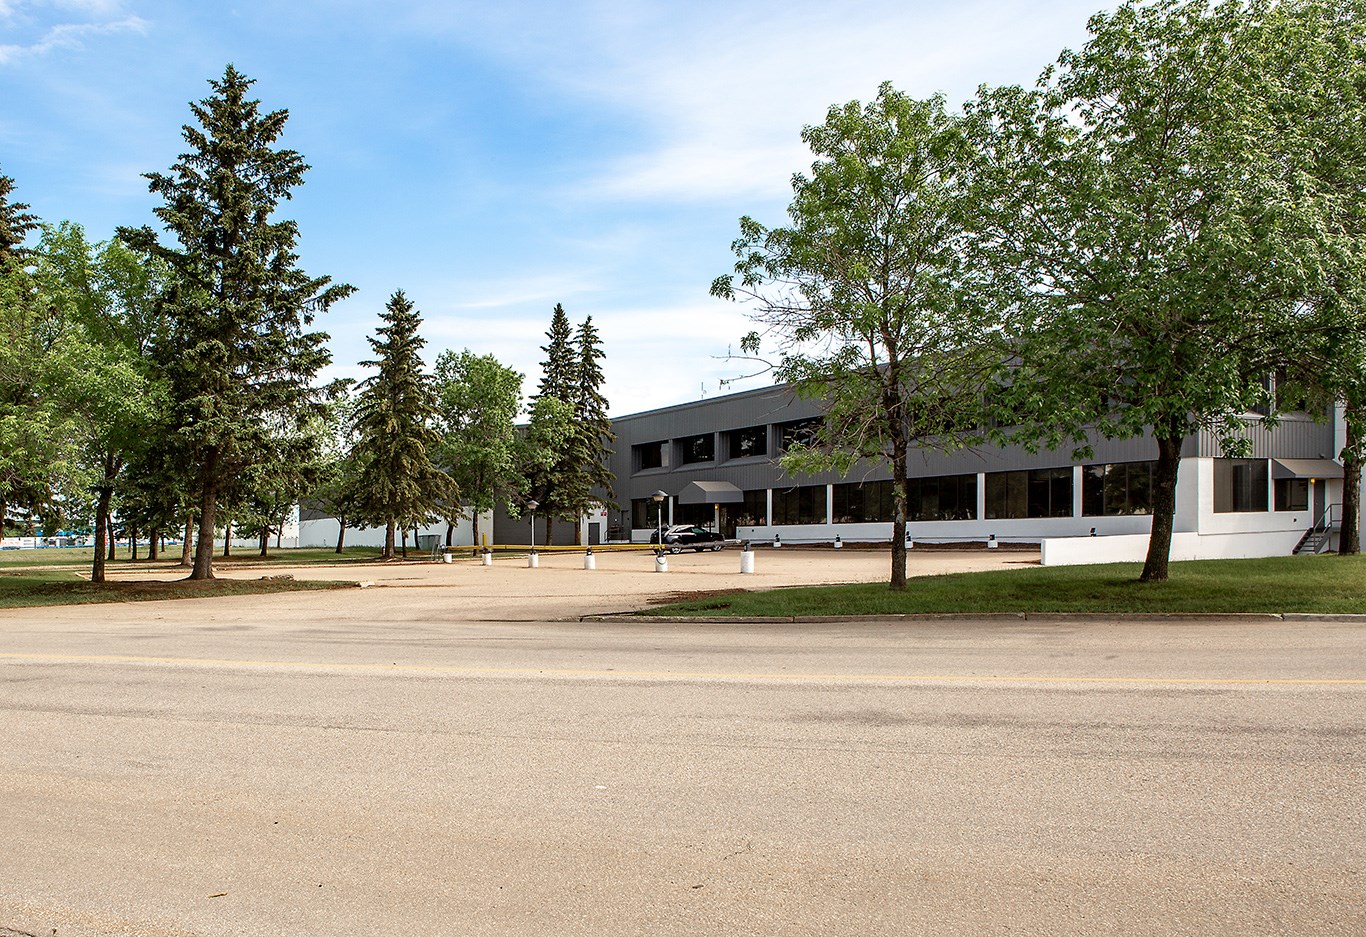 Dura-Line has already begun construction on the 150,000 sq. ft., state-of-the-art facility in St. Albert and has plans to hire as many as 90 full-time employees over the next 9 months – with the goal to be fully operational by spring of 2023.